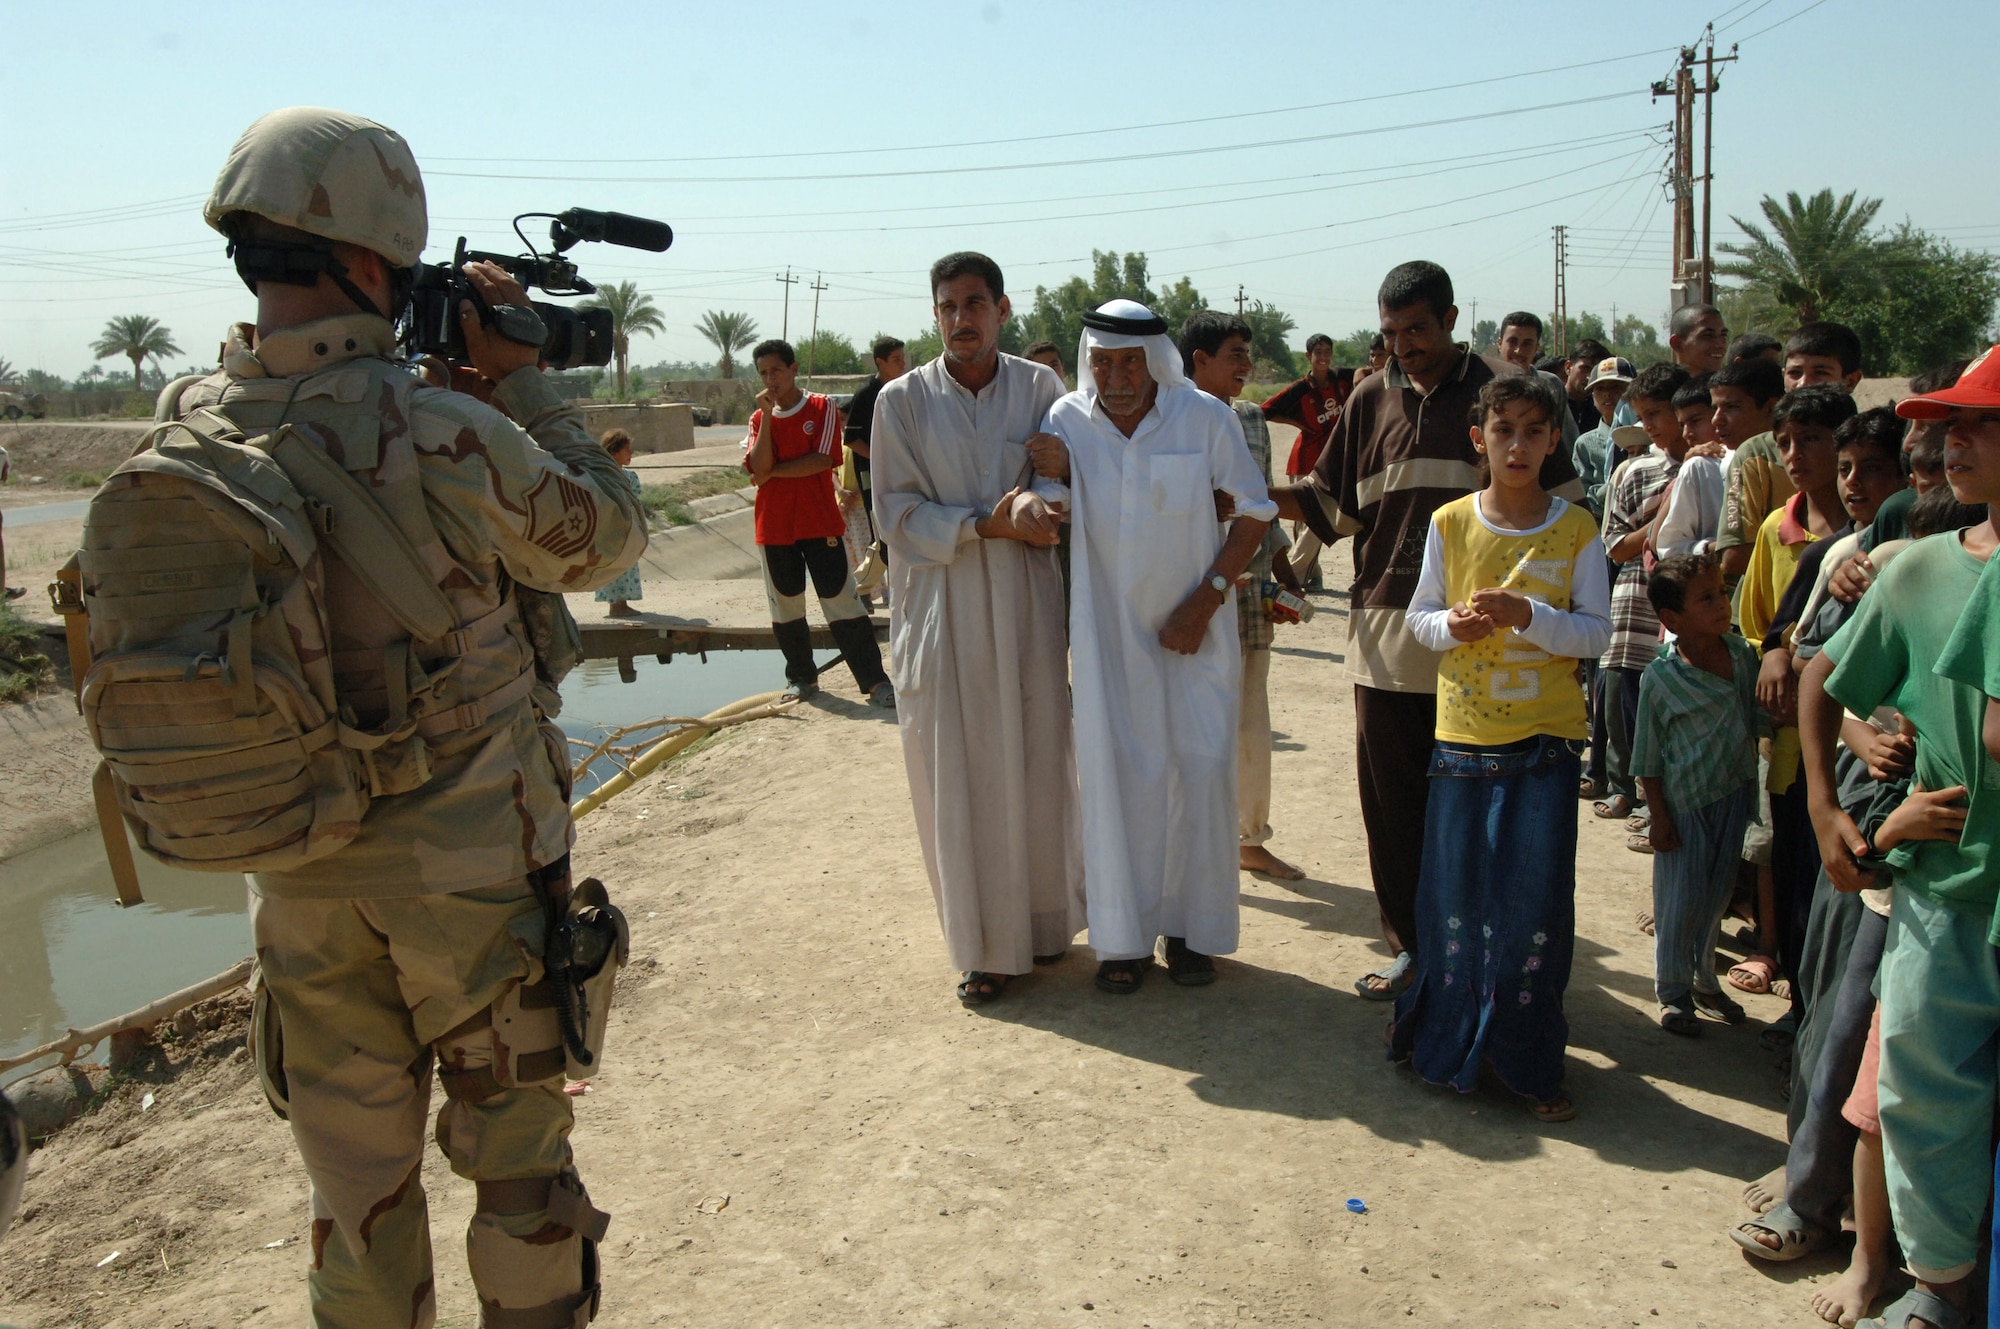 Master Sgt. Christopher Nolan videotapes Iraqi citizens during an Army exercise conducted in Baghdad, Iraq, on Saturday, June 24. Sergeant Nolan is a combat videographer with the 1st Combat Camera Squadron at Charleston Air Force Base, S.C. (U.S. Army photo by Staff Sgt. Kevin L. Moses Sr.)